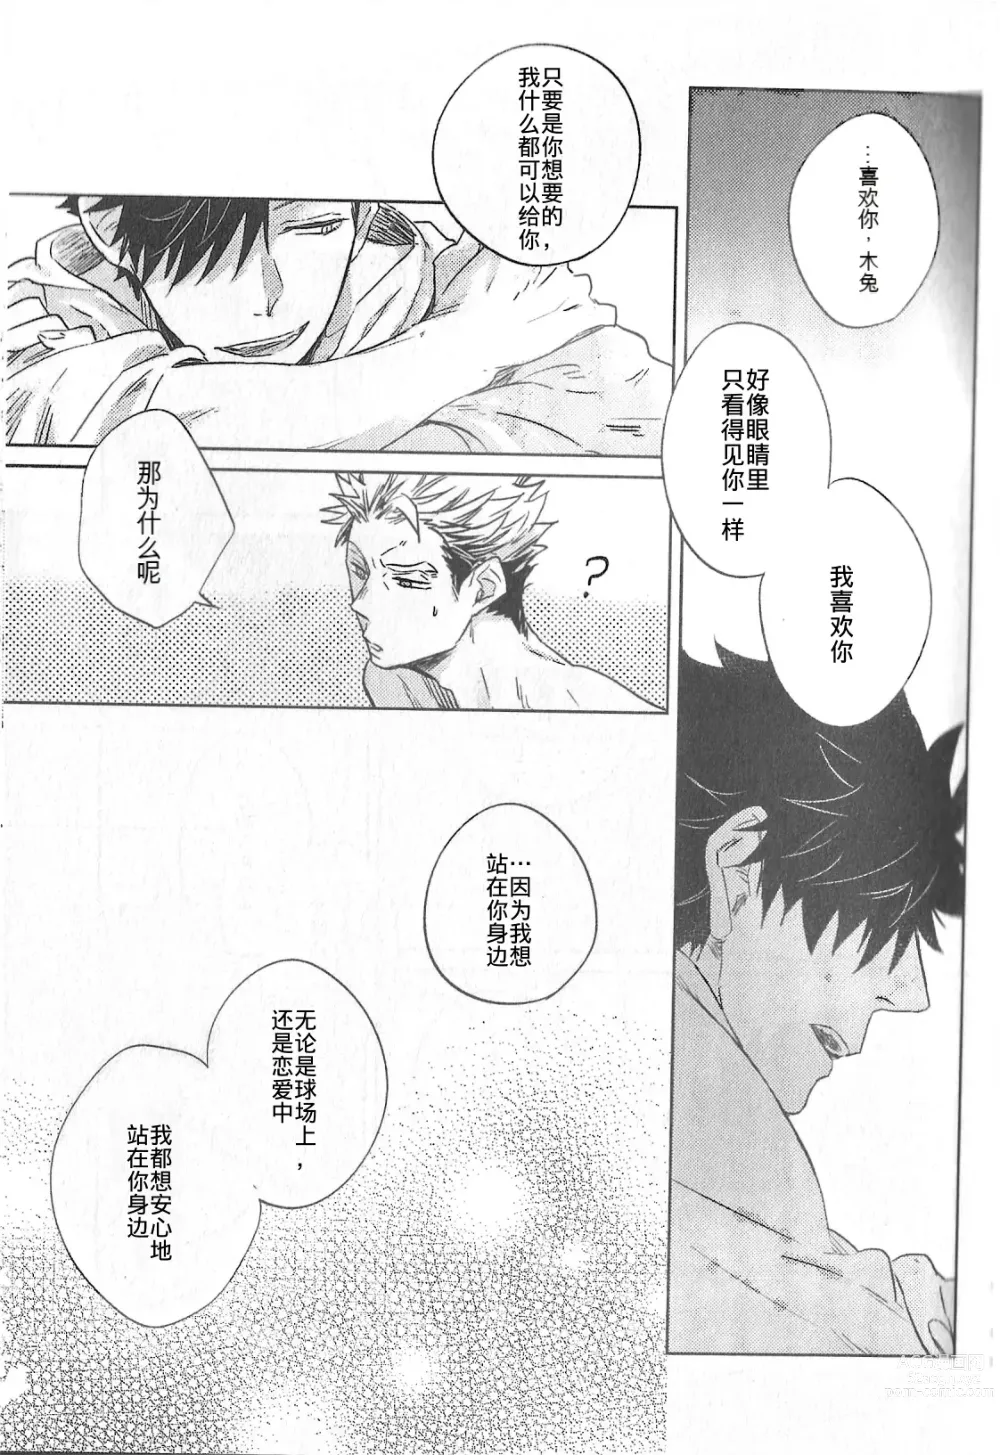 Page 14 of doujinshi 极境的野兽 后篇